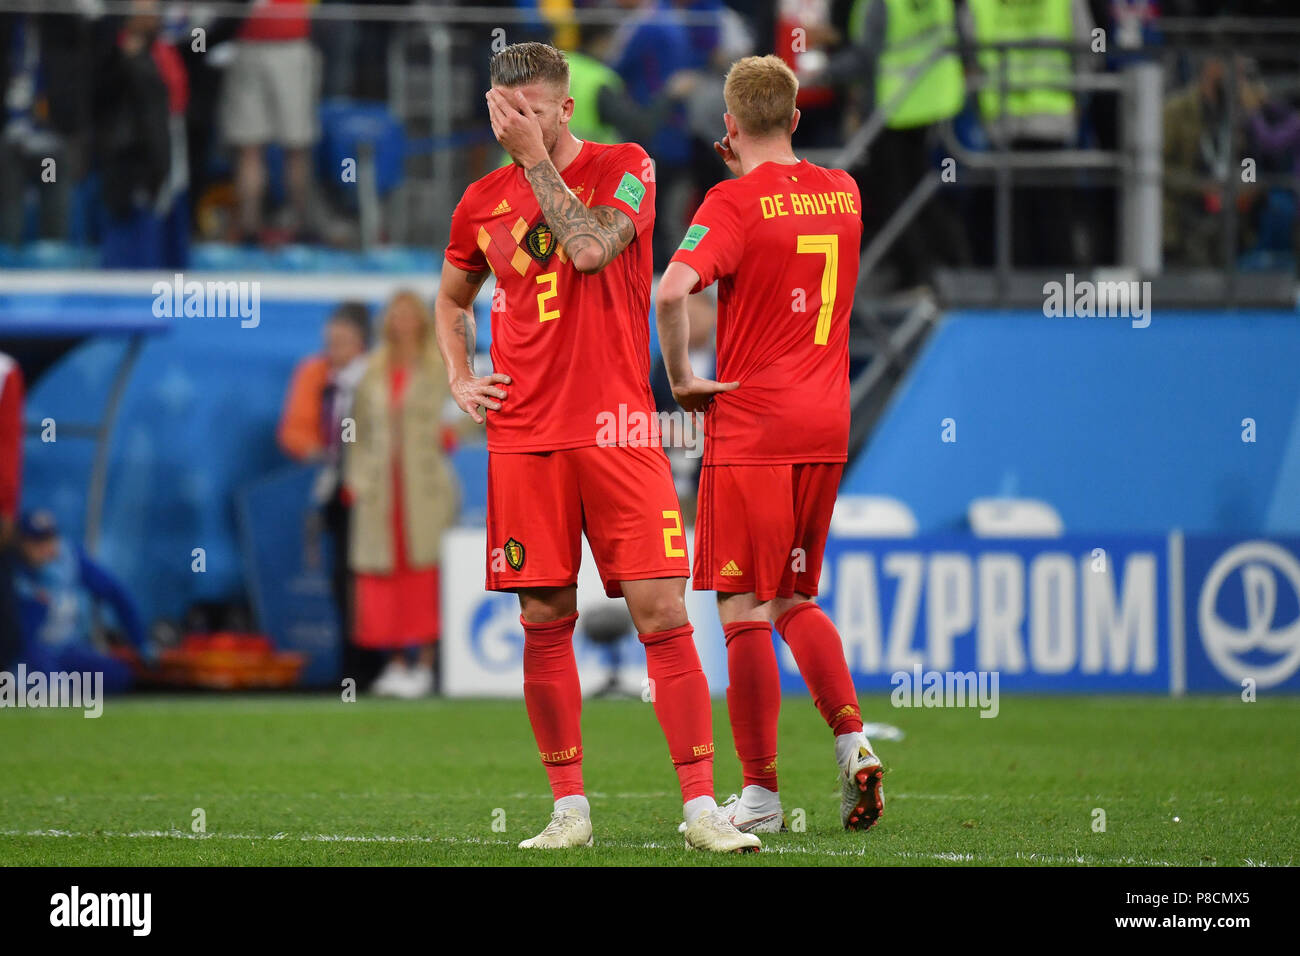 St. Petersburg, Russia. 10th July 2018. Toby ALDERWEIRELD (BEL), Kevin DE BRUYNE (BEL), disappointment, frustrated, disappointed, frustrated, dejected, after the end of the game, action. France (FRA) - Belgium (BEL) 1-0, Semifinals, Round of FourSpiel 61 on 10.07.2018 in Saint Petersburg, Saint Petersburg Arena. Football World Cup 2018 in Russia from 14.06. - 15.07.2018. ? Sven Simon Photo Agency GmbH & Co. Press Photo KG # Prinzess-Luise-Str. 41 # 45479 M uelheim/Ruhr # Tel. 0208/9413250 # Fax. 0208/9413260 # GLS Bank # BLZ 430 609 67 # Kto. 4030 025 100 # IBAN DE75 4306 0967 4030 0251 00 # B Stock Photo